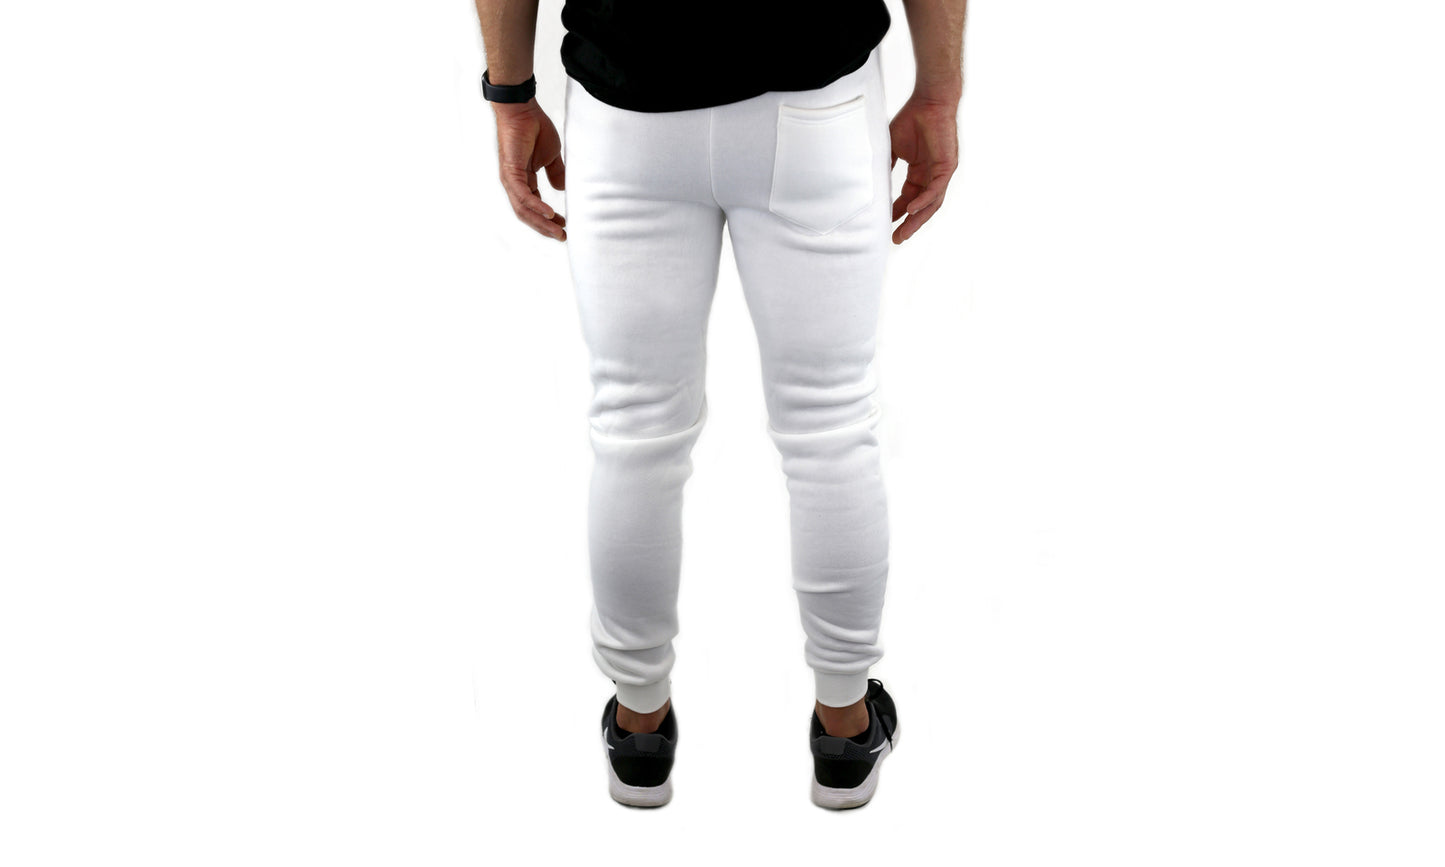 Mens Skinny Track Pants Joggers Trousers Gym Casual Sweat Cuffed Slim Trackies Fleece - White - M